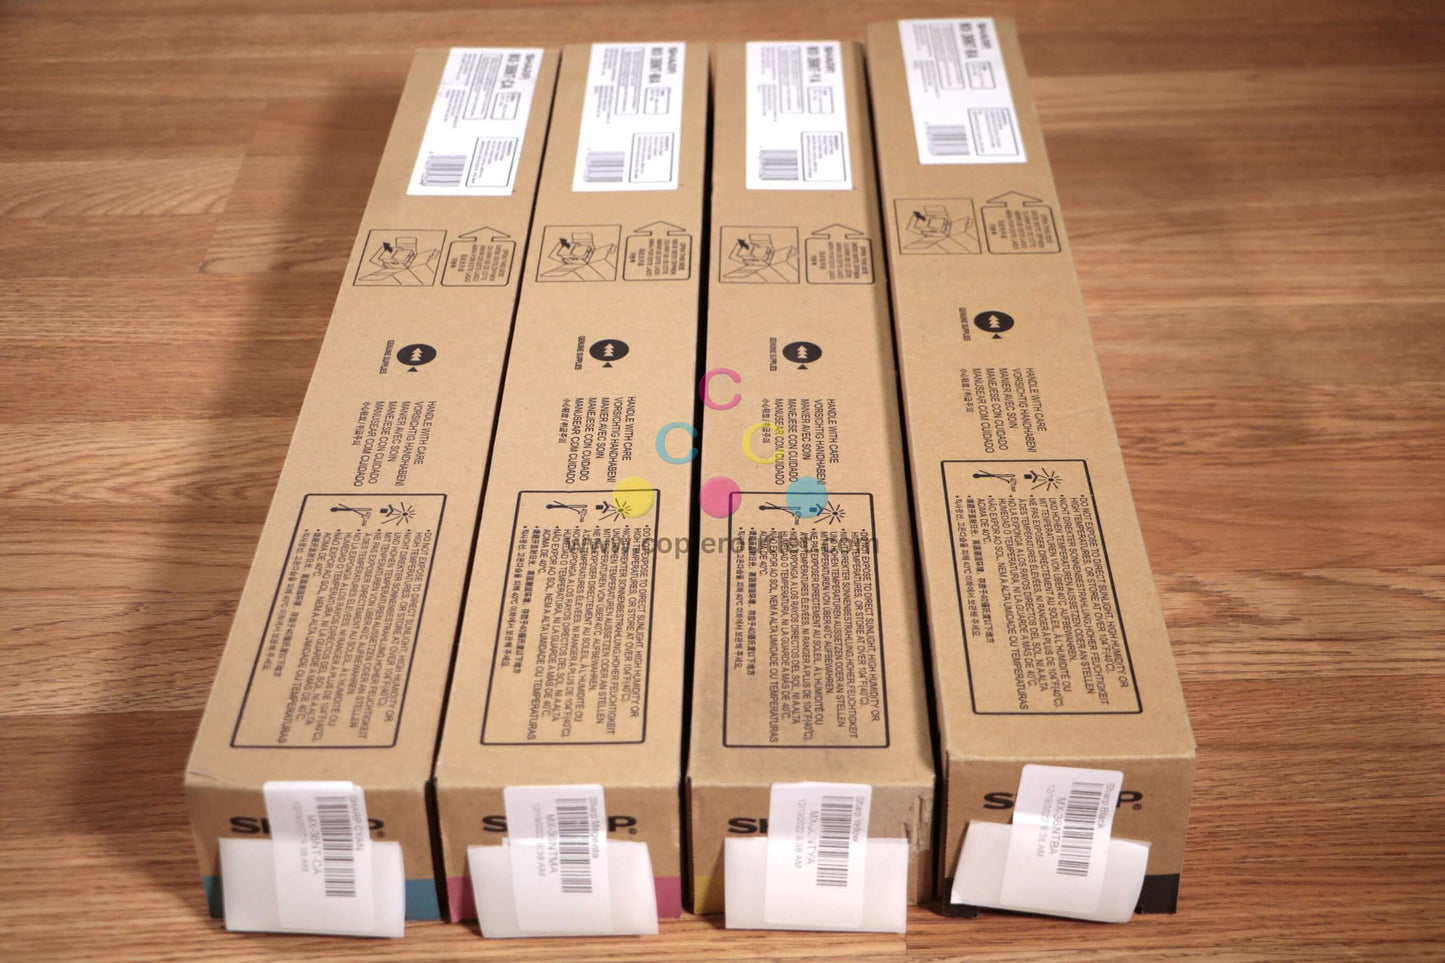 Sharp MX-36NT CMYK Toner Set MX- 2610N,2615N,2640N,3110N,3115N,3140N,3610N,3640N - copier-clearance-center